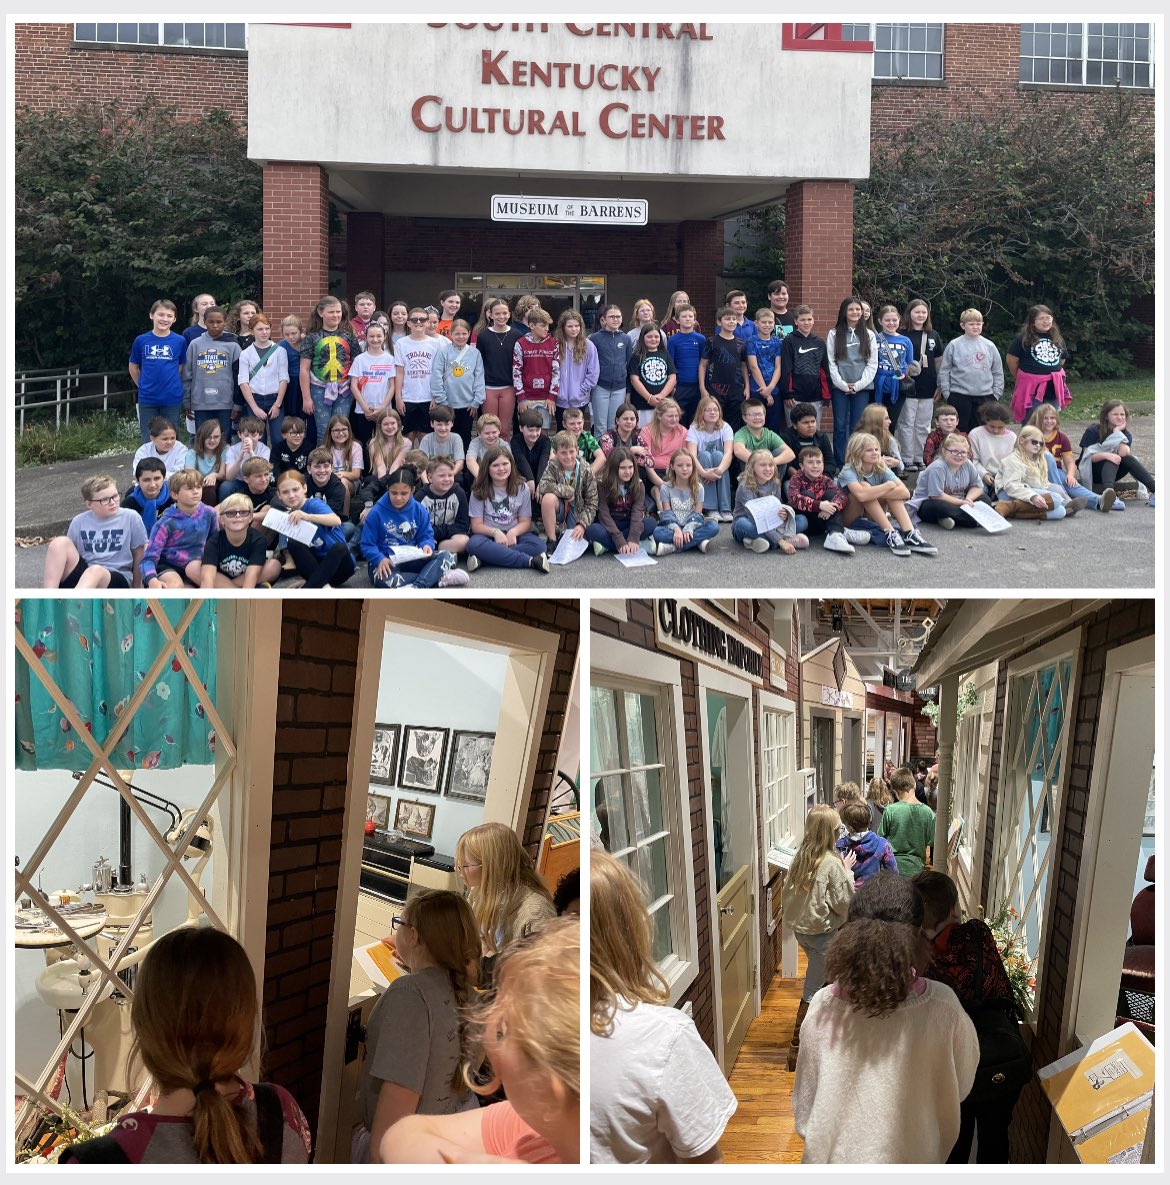 Wonderful Elem GT Seminar Day trip to the So Central Cultural Center today in Glasgow!  Our students learned so much about our rich history!  Salute to Mrs Richey, Mrs Wallace, Mr Alexander & all of our school coordinators for planning the trip!  #WhereOpportunityCreatesSuccess